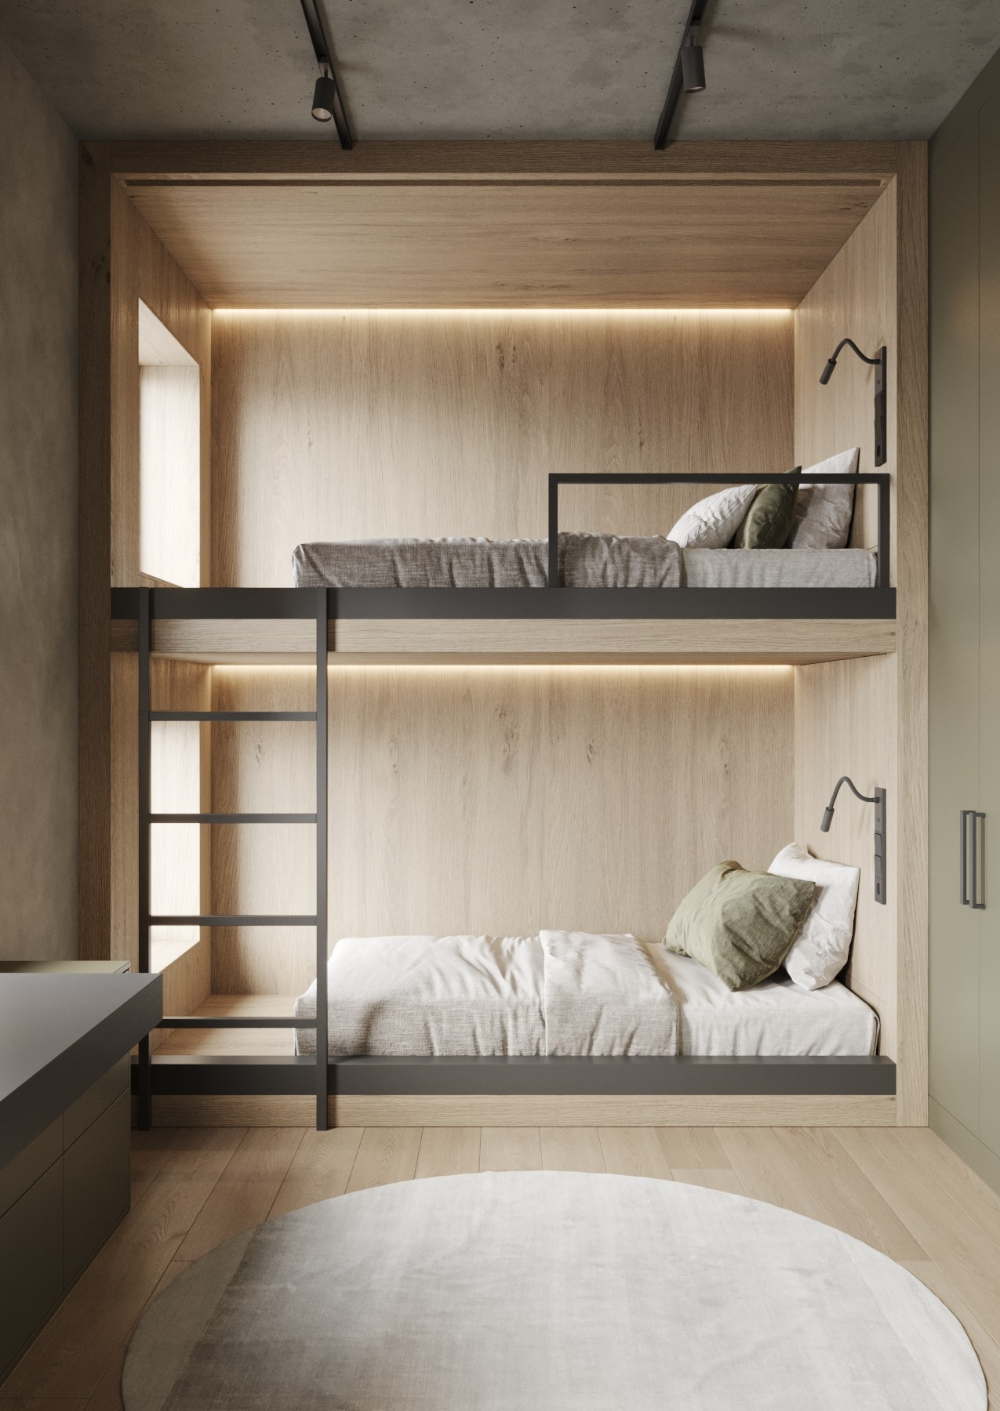 Some Materials Used For Bunk Beds